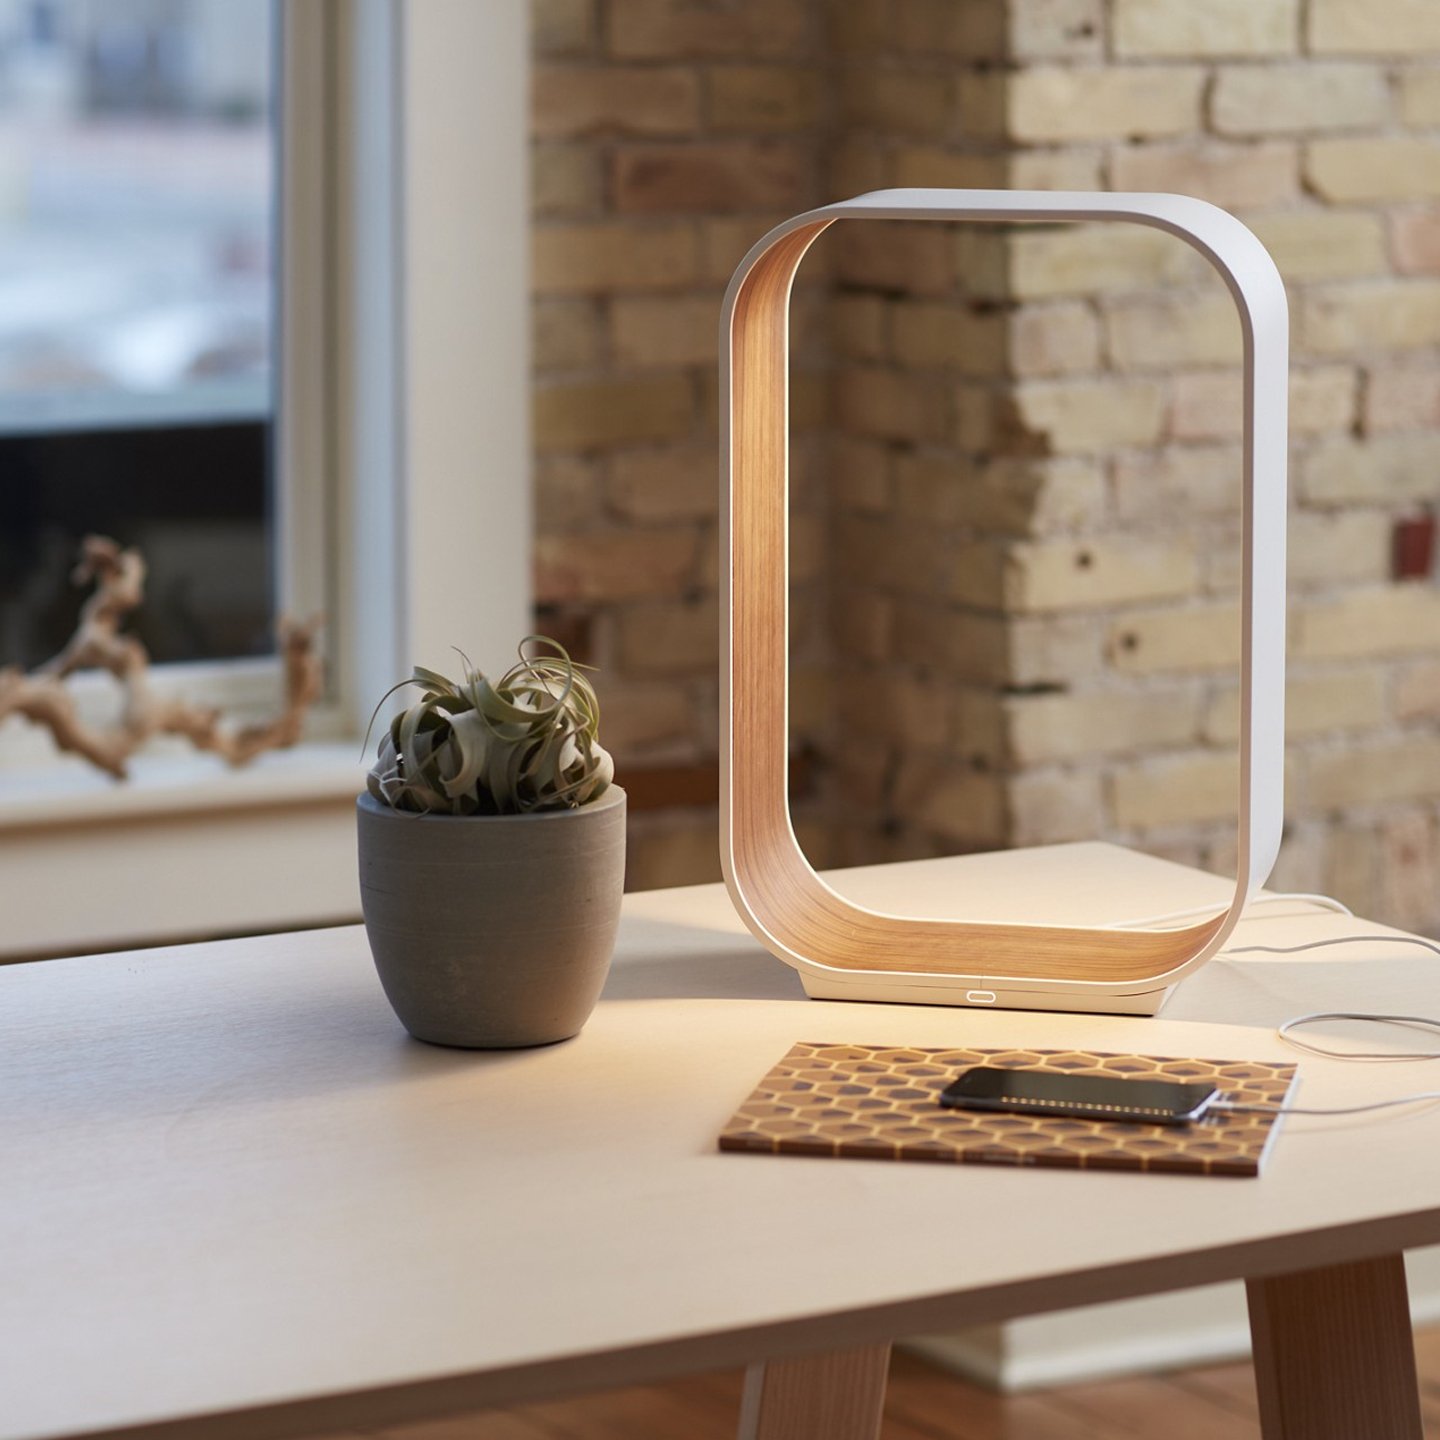 Haworth Contour Lighting in white color and wood finish on office desk with phone and plant